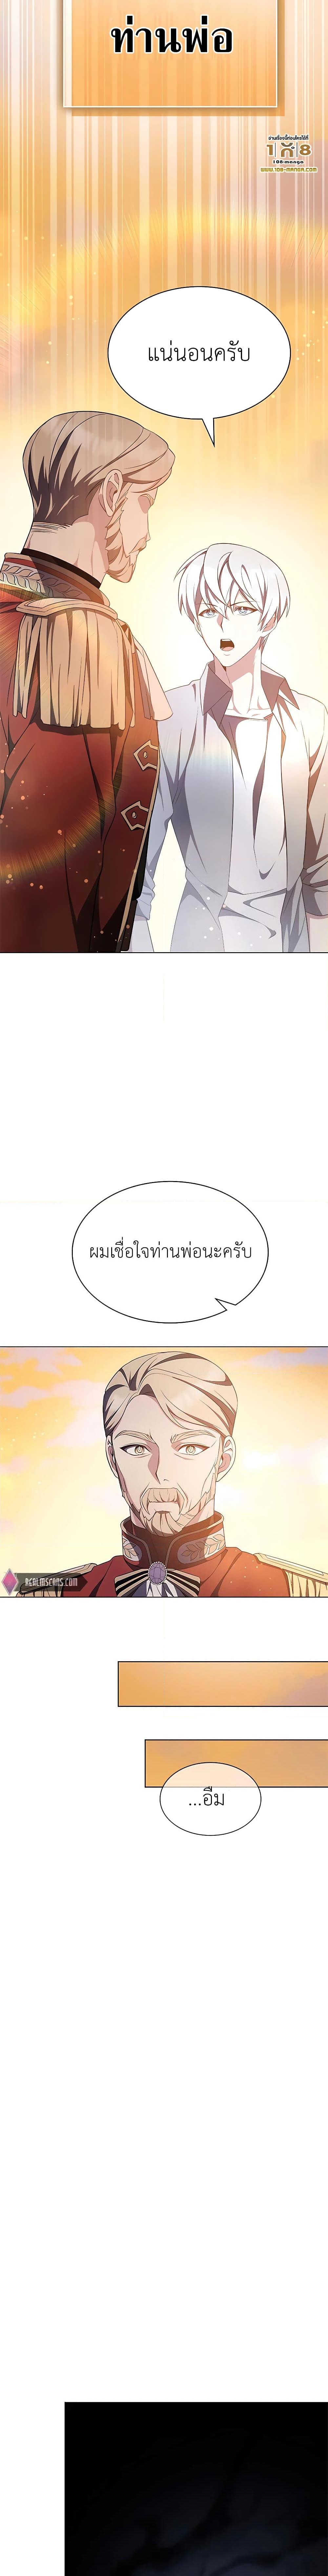 My Lucky Encounter From the Game Turned Into Reality ตอนที่ 4 (11)